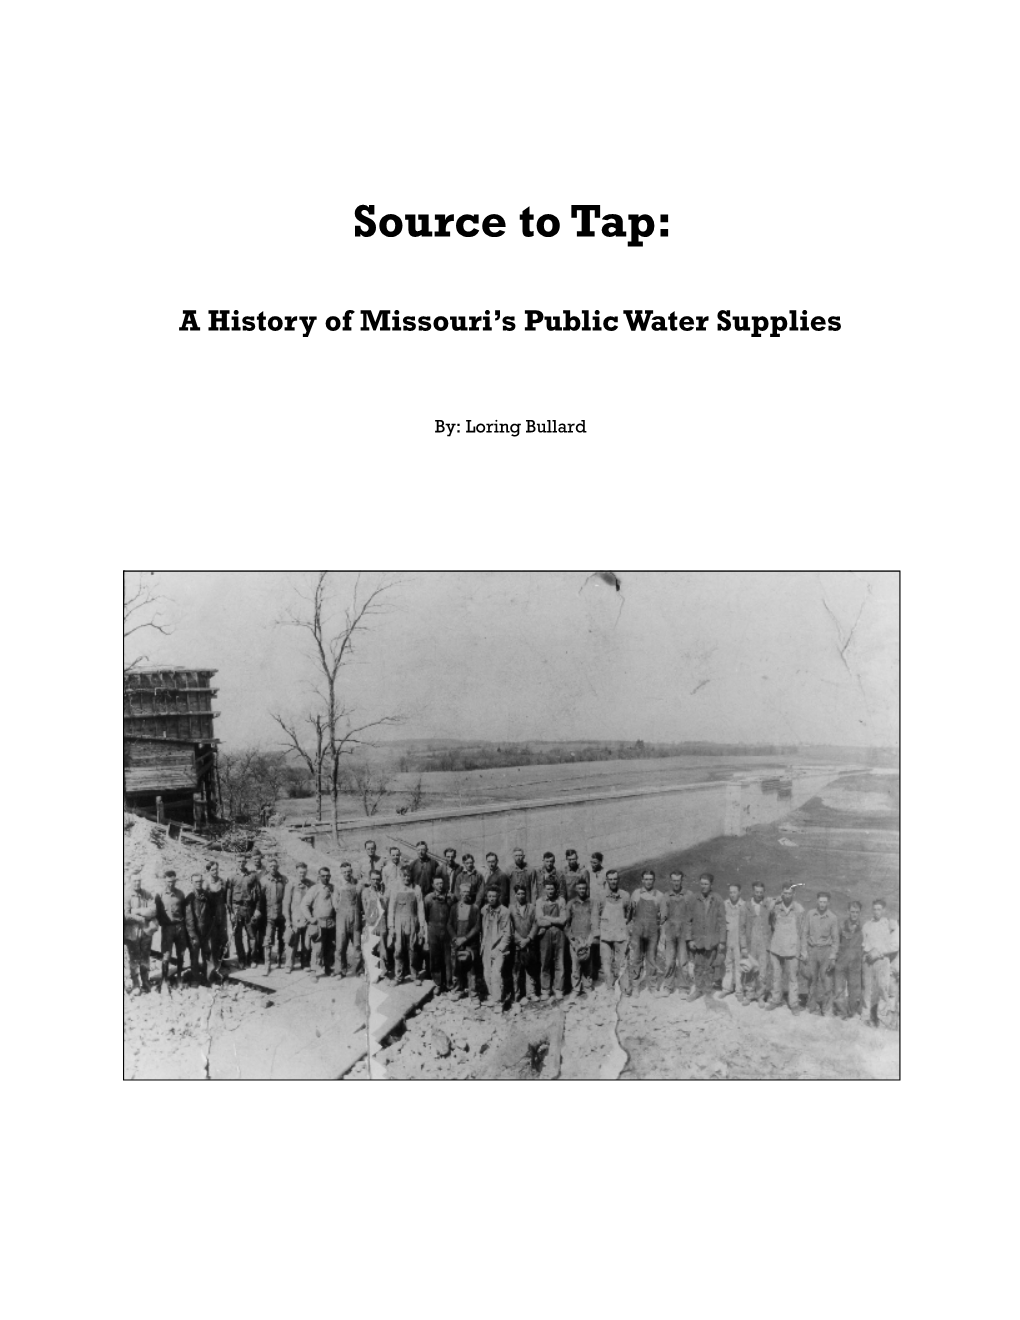 Source to Tap: a History of Missouri's Public Water Supplies